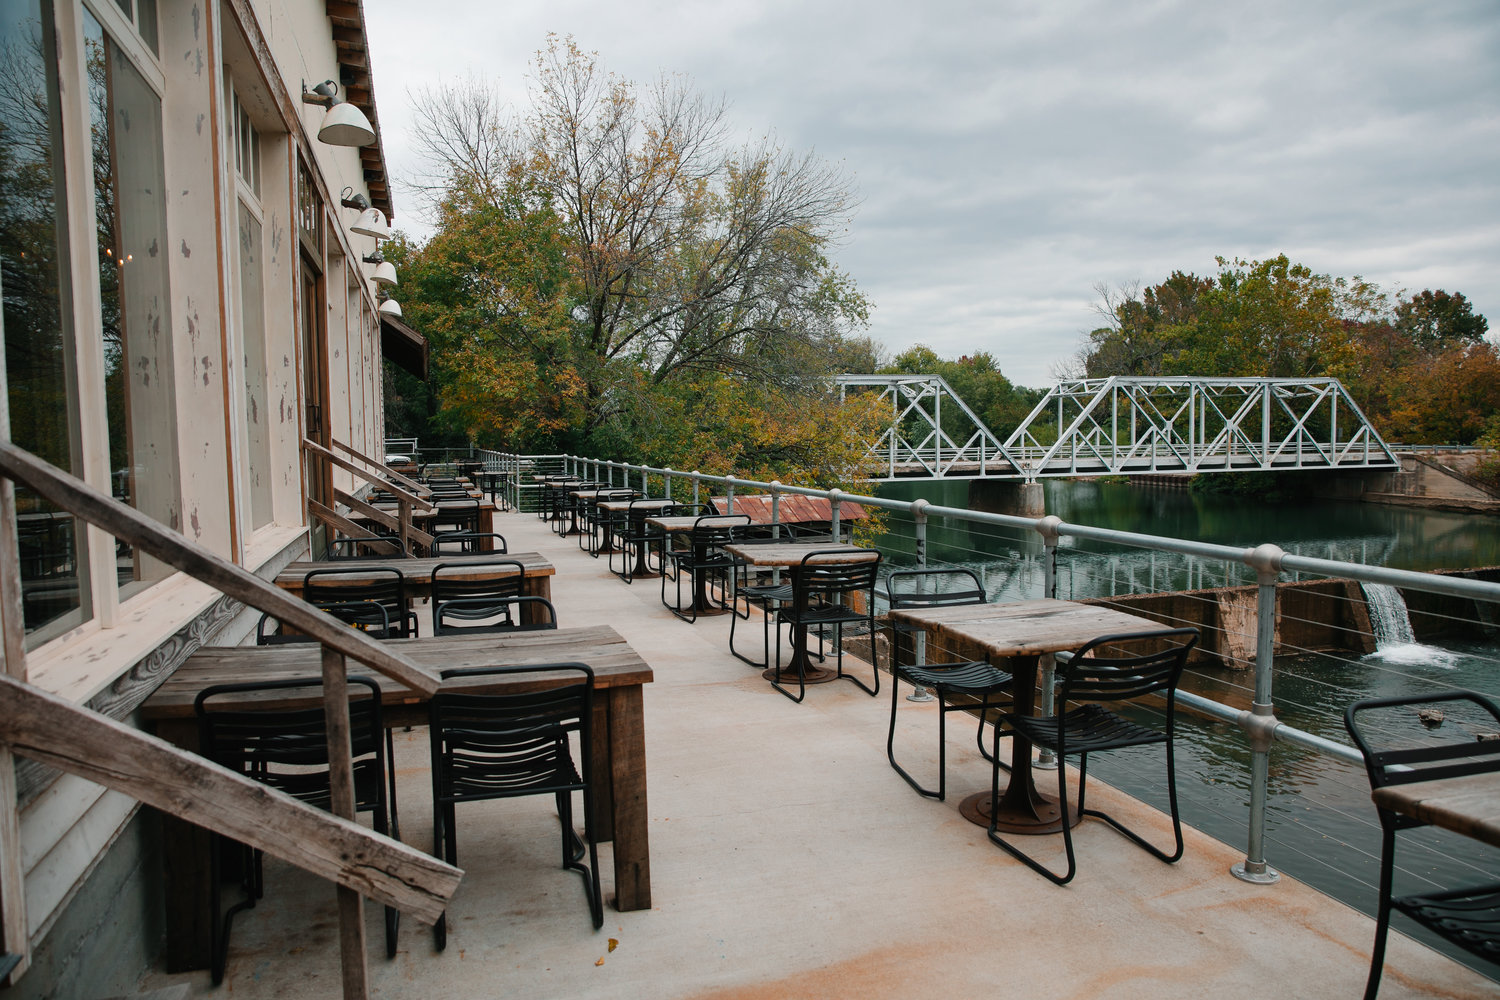 Outside diners at The Ozark Mill Restaurant have views of the Finley River and Riverside Bridge.